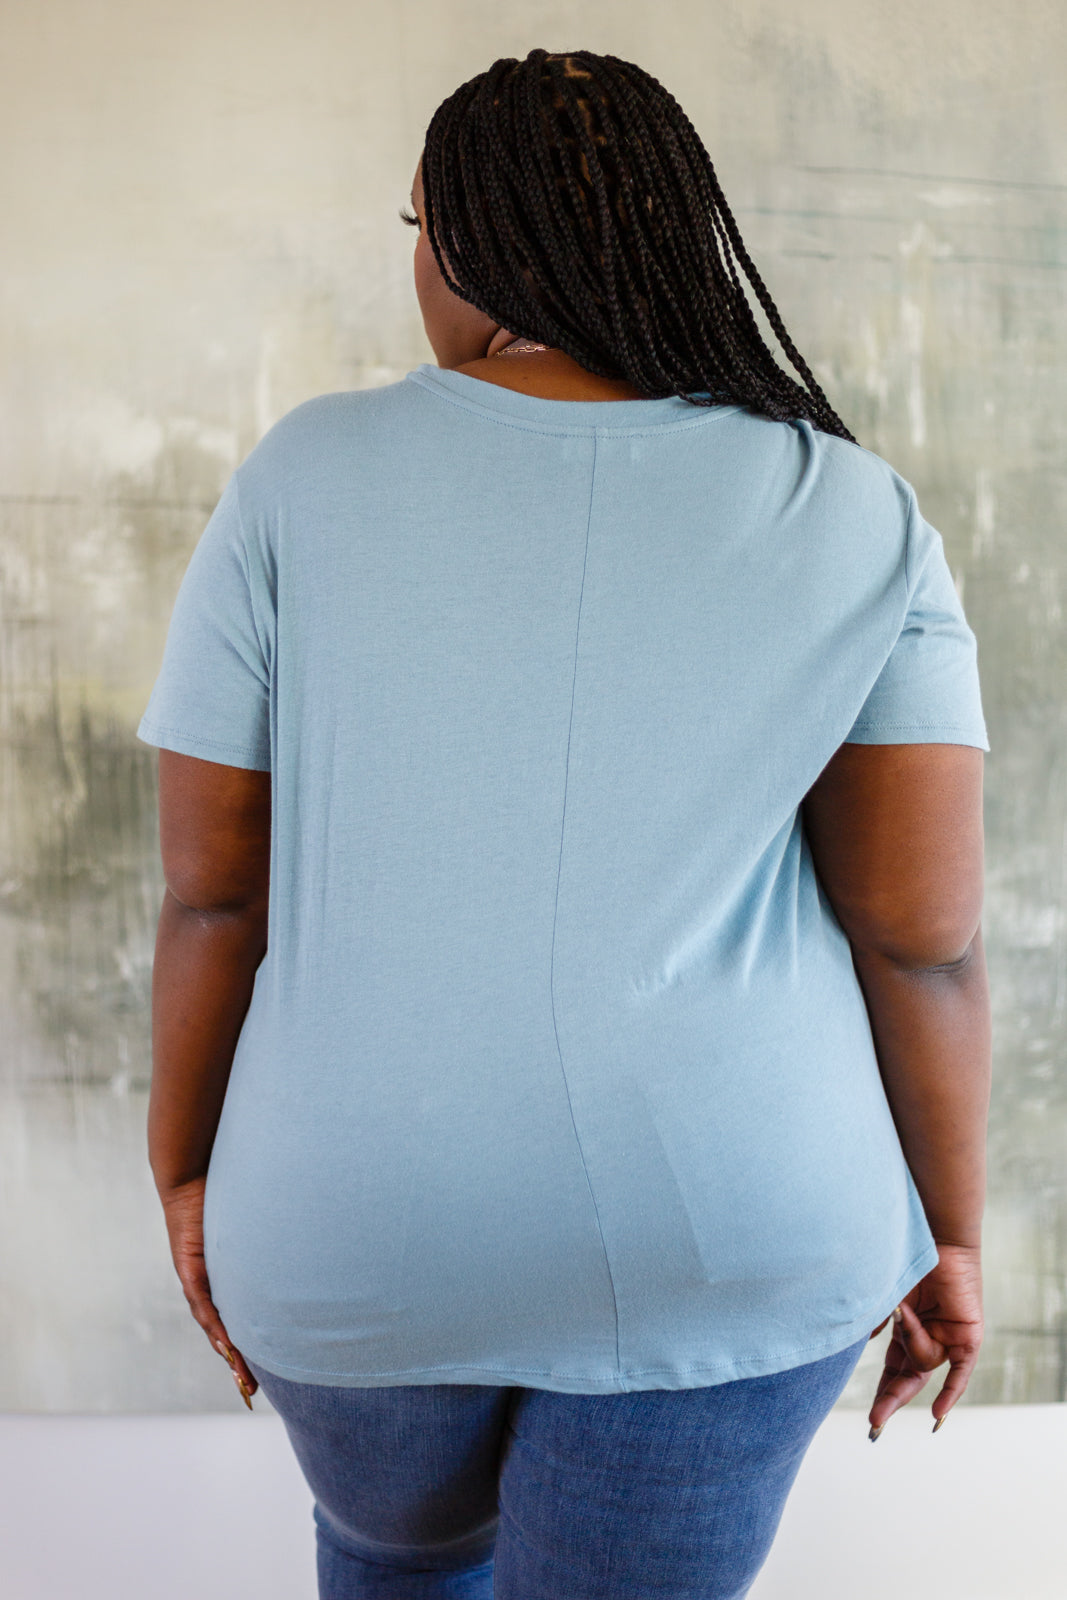 Cardinal Short Sleeve Tee in Blue Grey-Tops-Inspired by Justeen-Women's Clothing Boutique in Chicago, Illinois